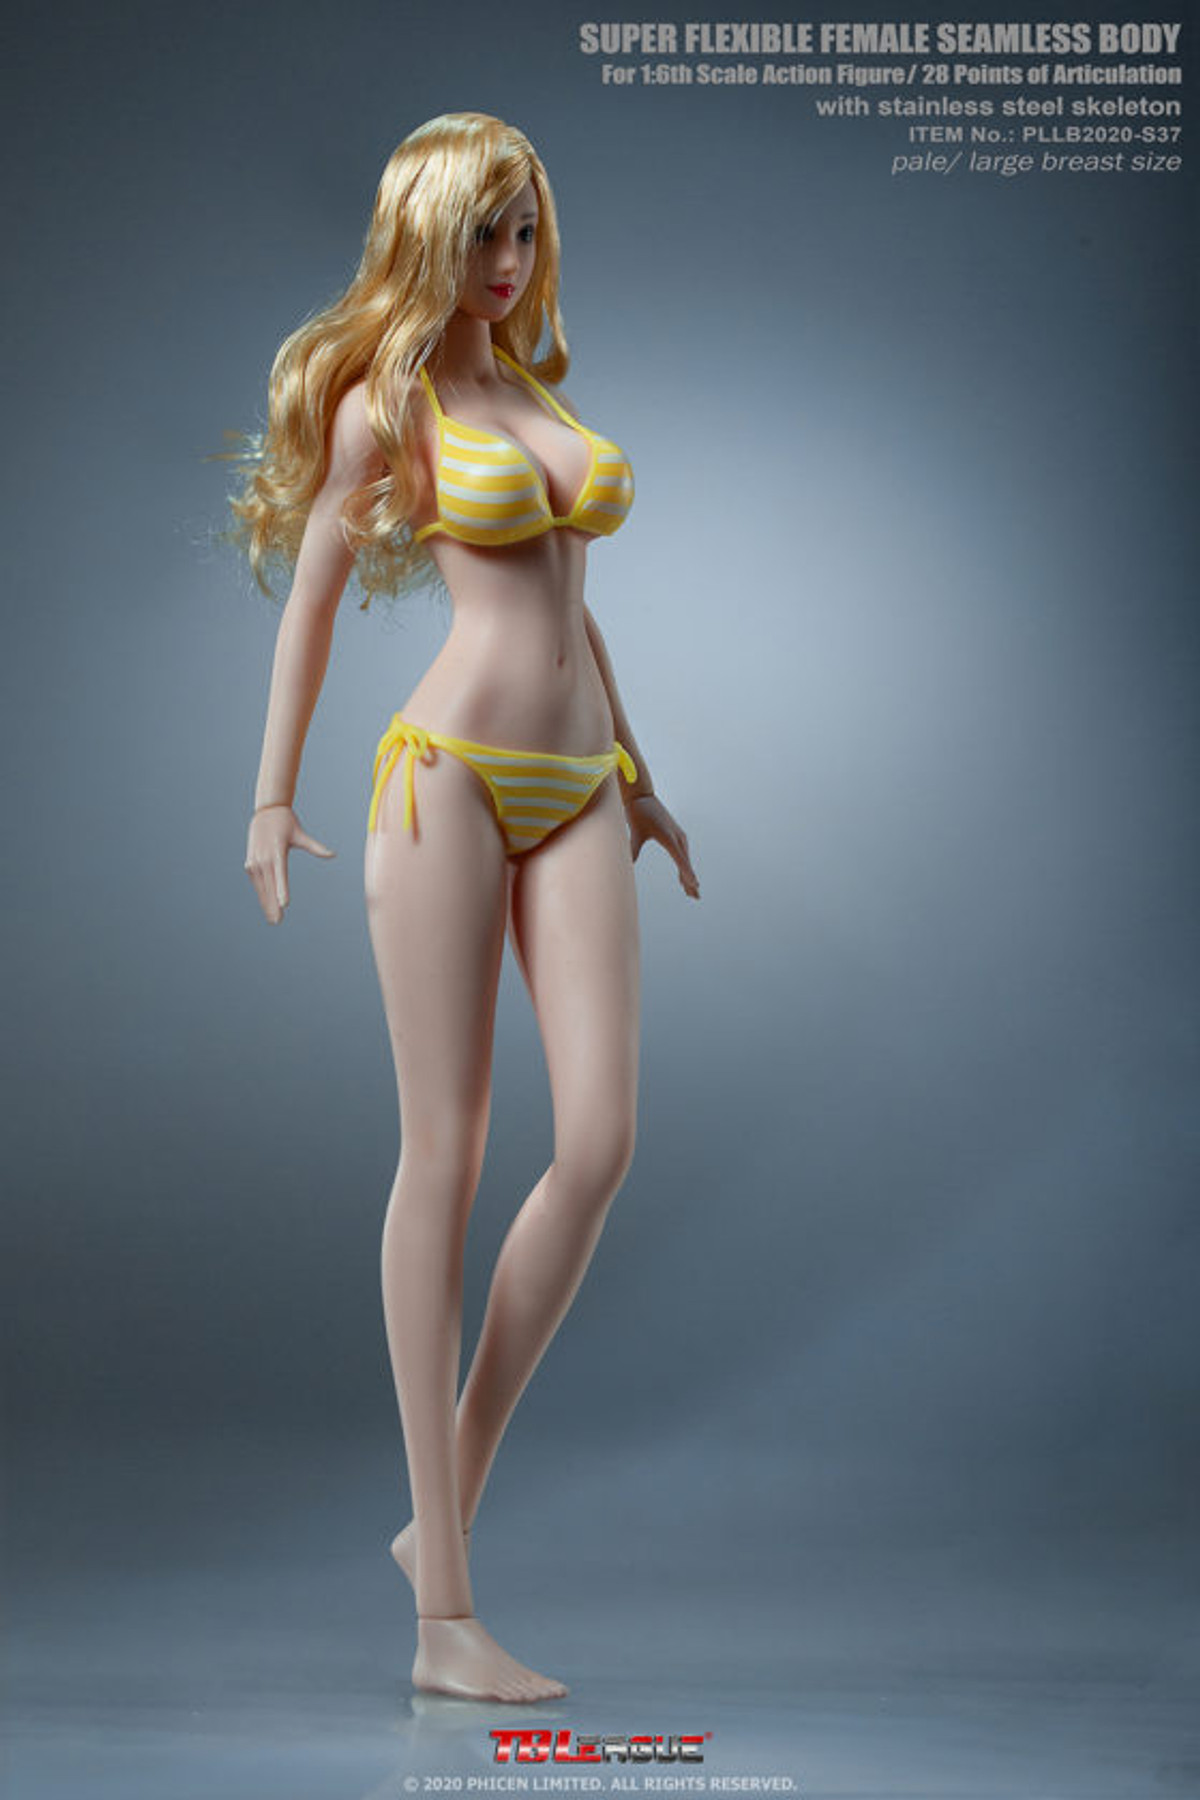 Female Super-Flexible Seamless Bodies Large Bust with Head - Two Versions -  TBLeague 1/12 Scale Figure